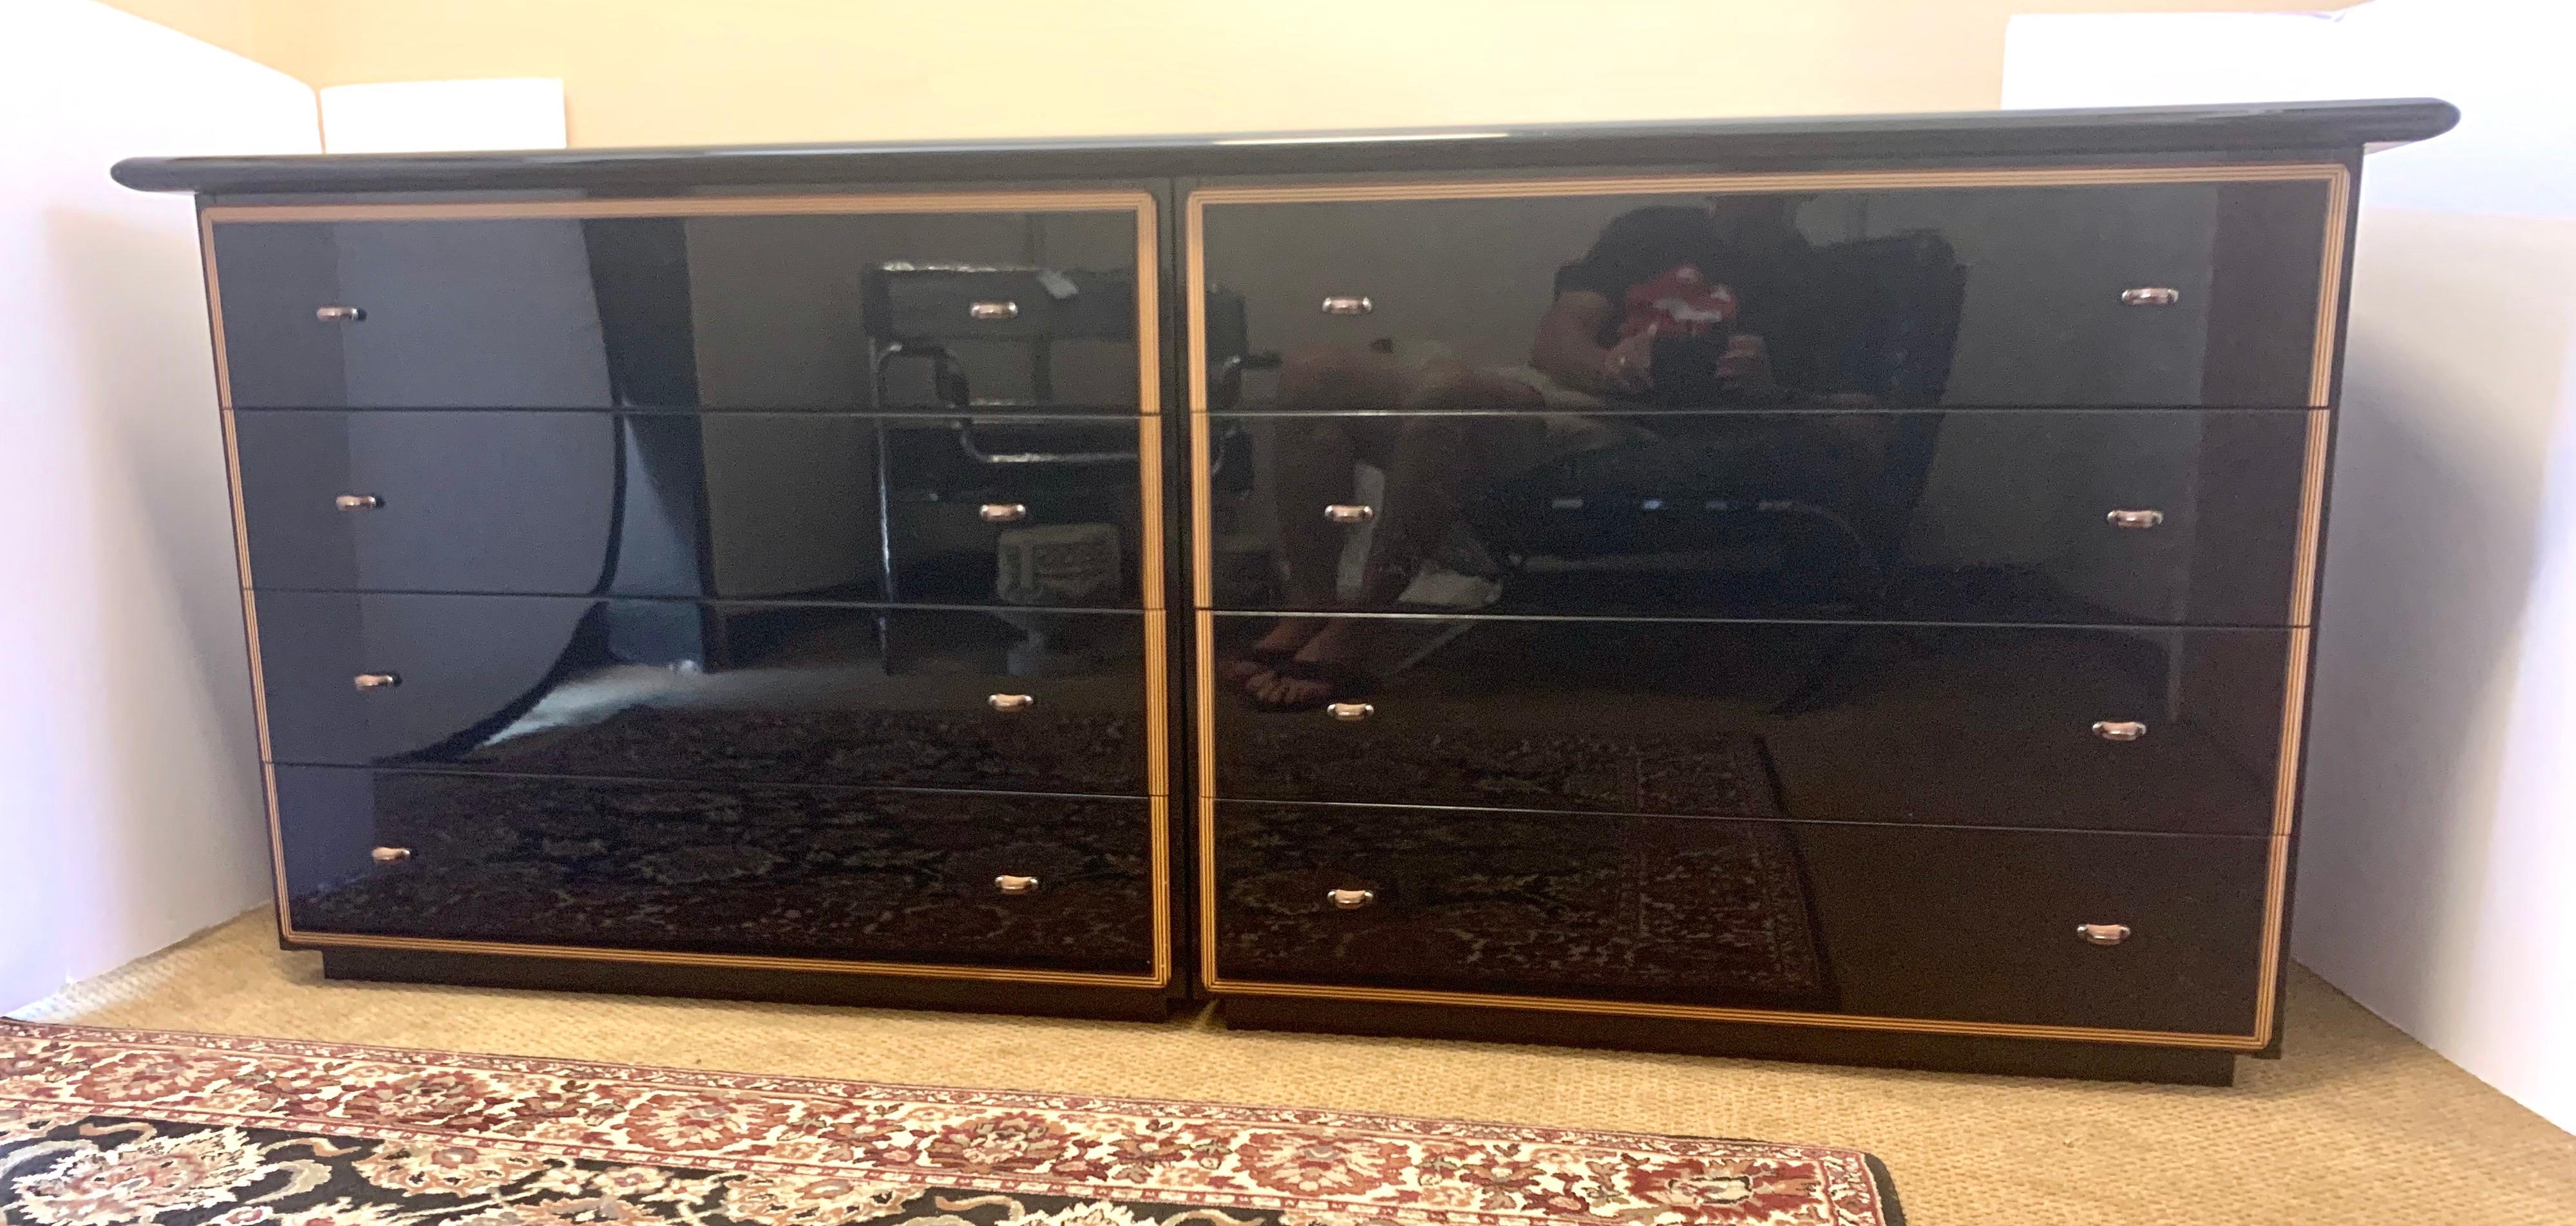 Made in Italy and signed, this black lacquered Roche Bobois dresser can function in several capacities.
The base is two chests that are conjoined by the top piece and make this an eight-drawer case piece perfect for a bedroom, living room, library